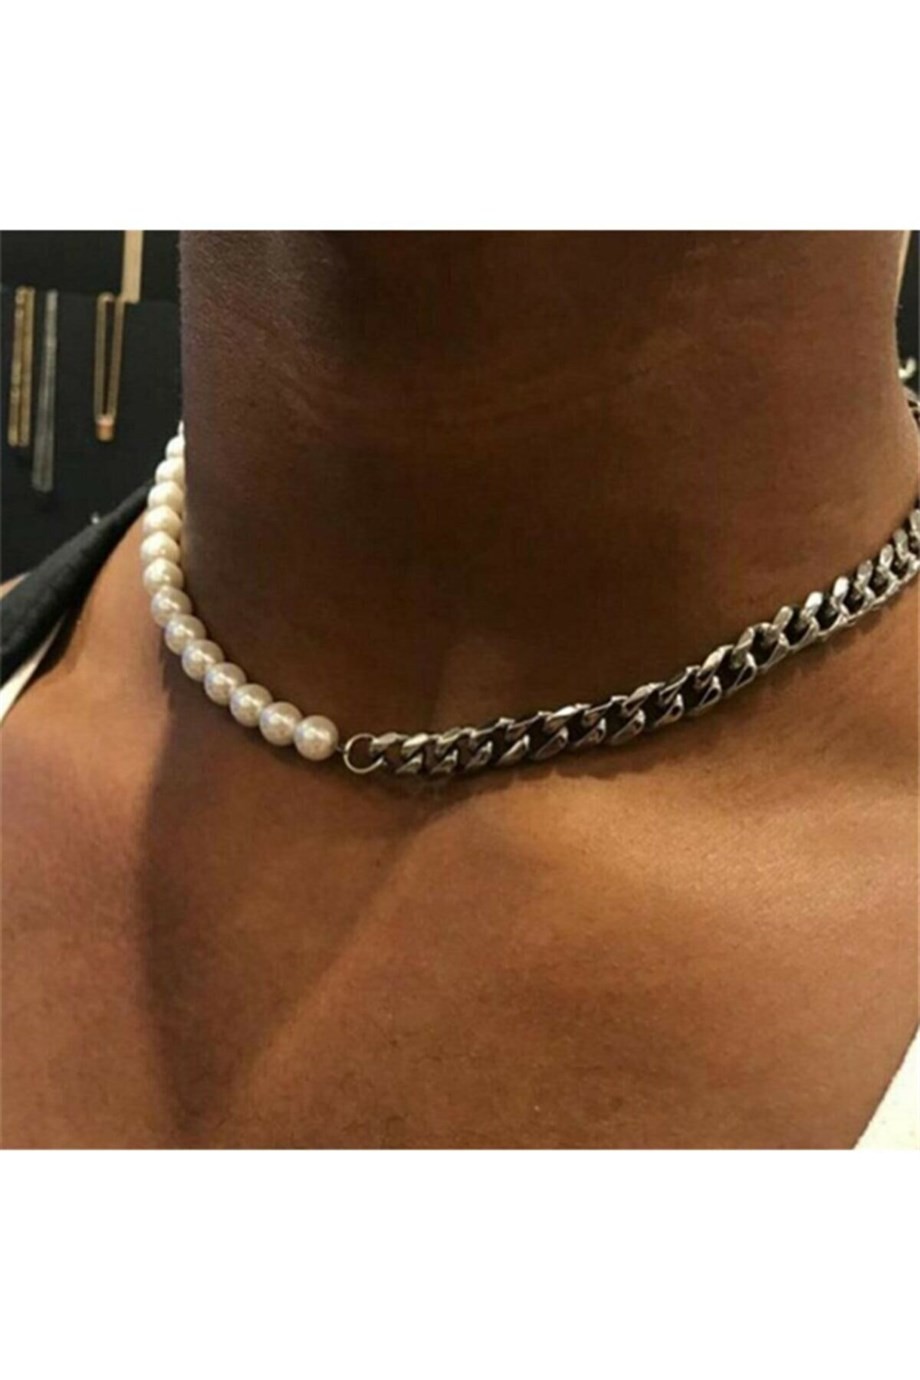 Unisex Silver Color Binary Pearl Necklace Thick Chain Necklace